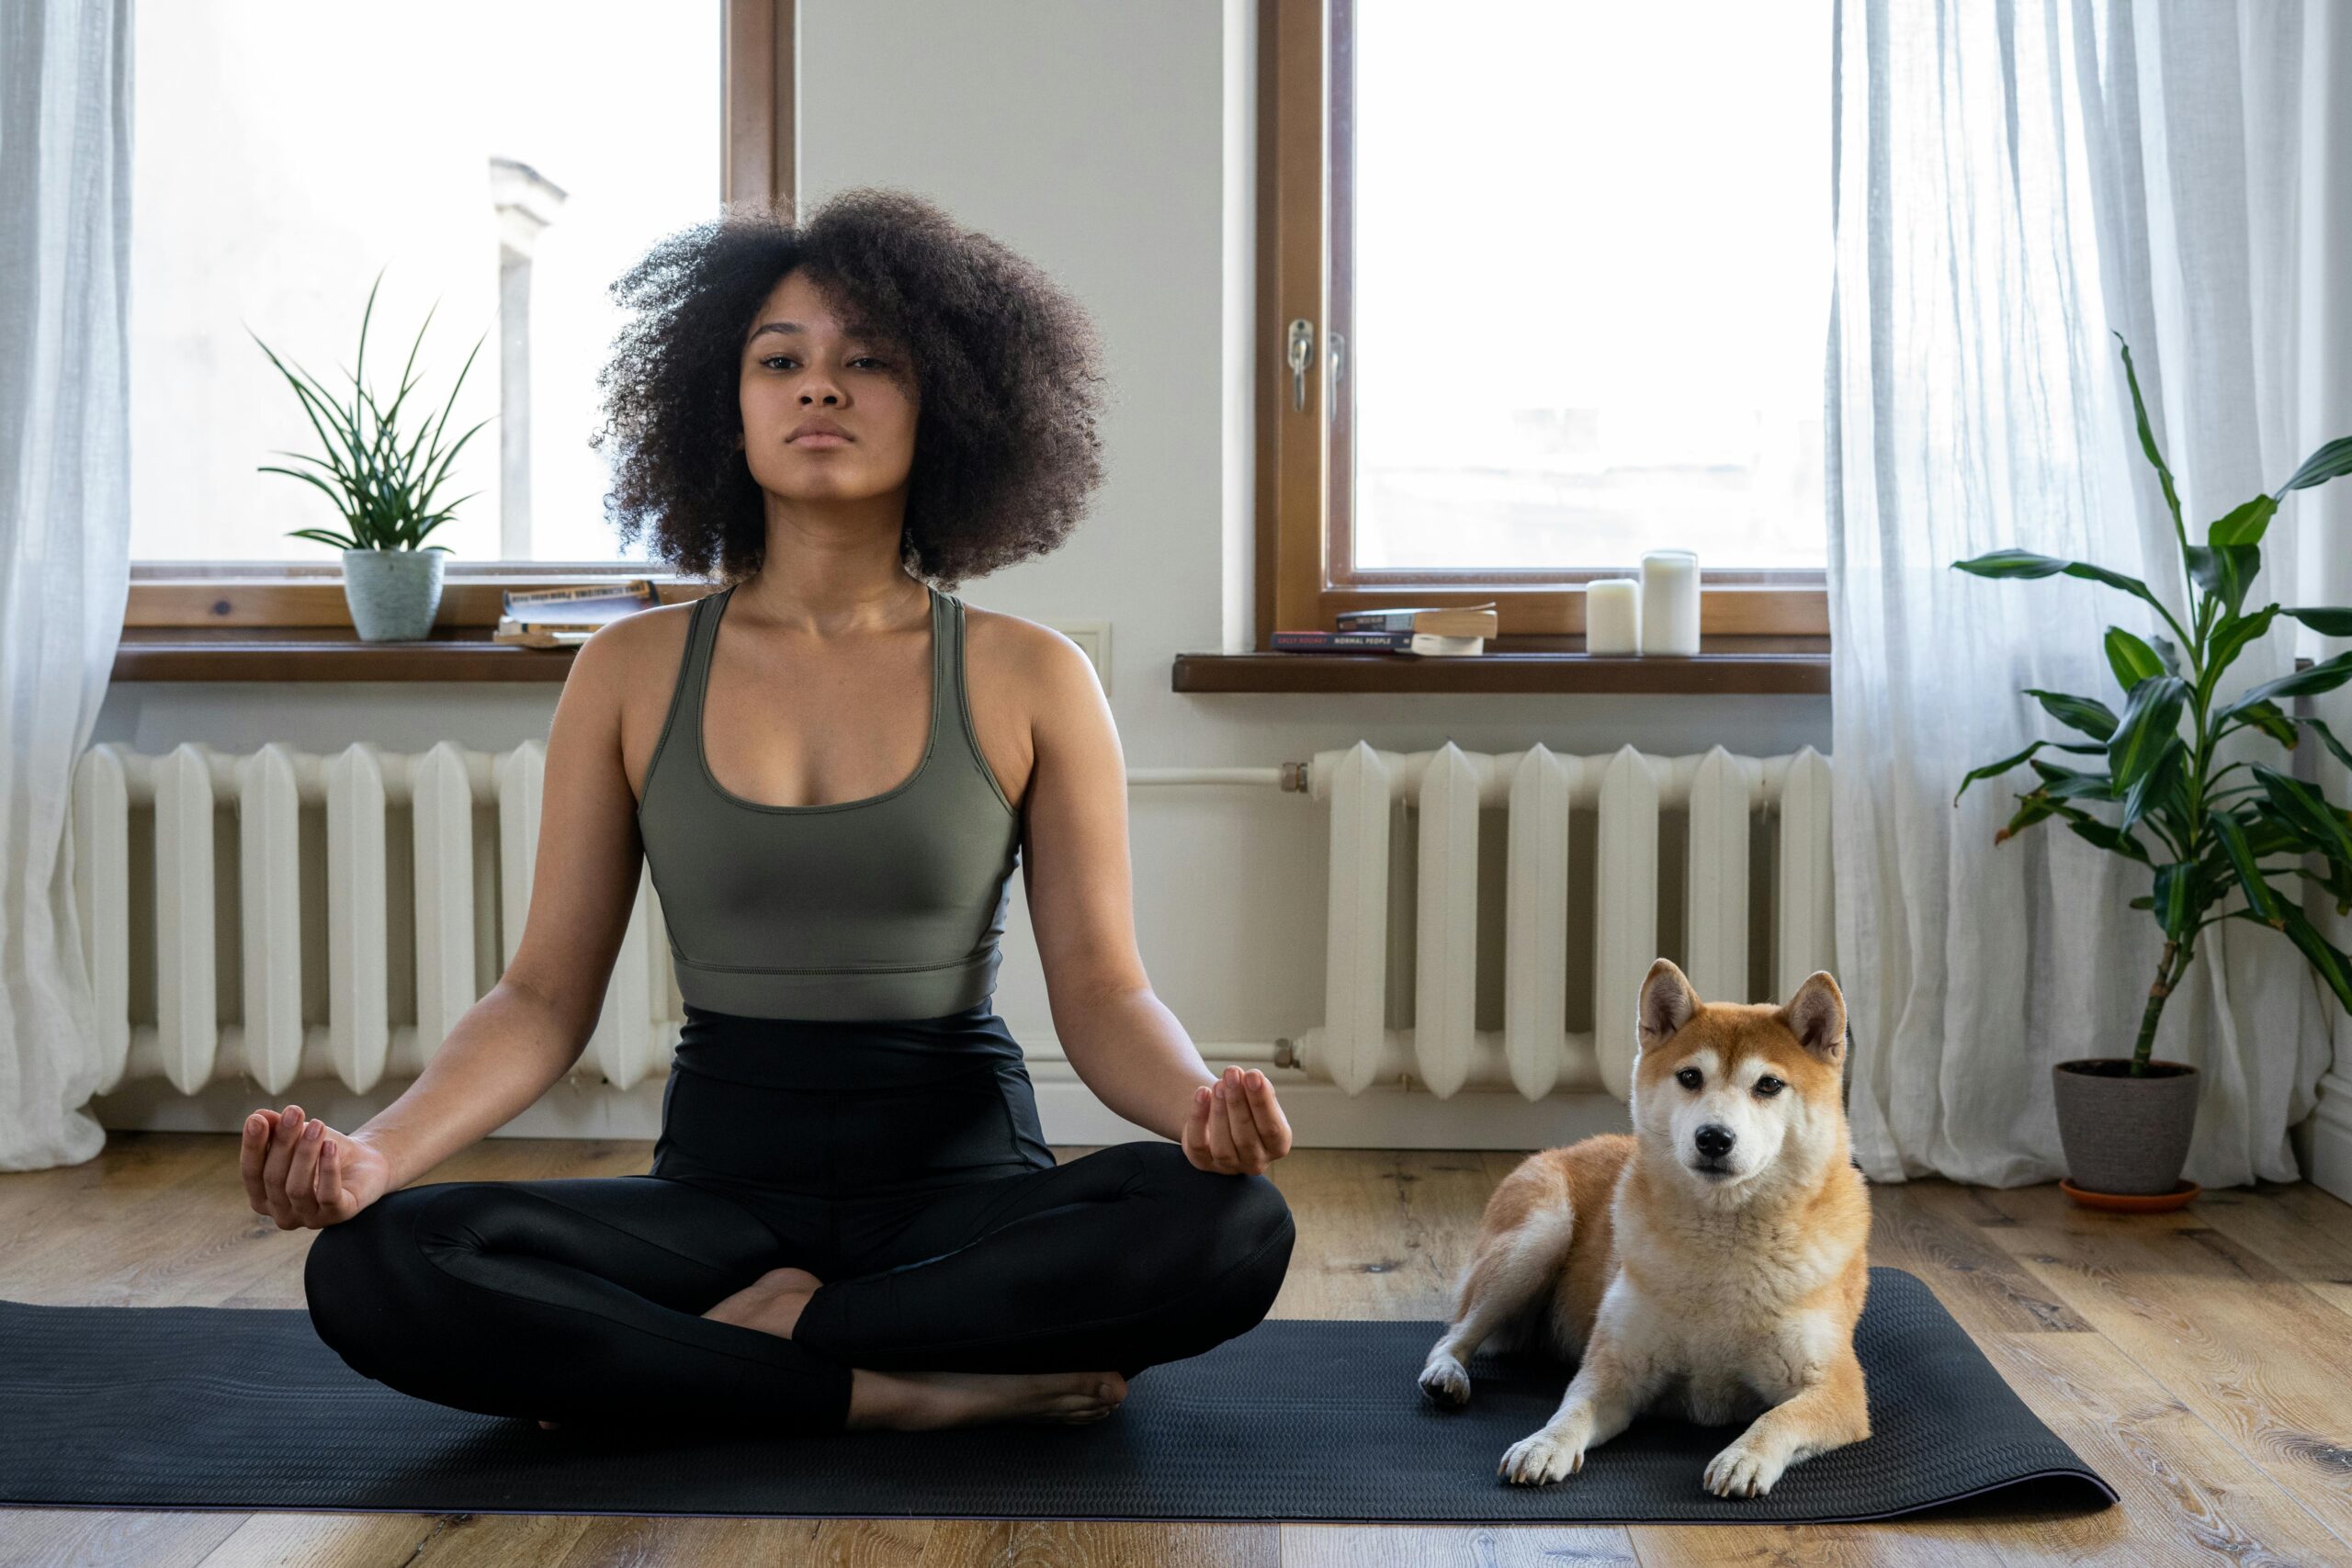 A woman doing yoga poses on a mat near a dog